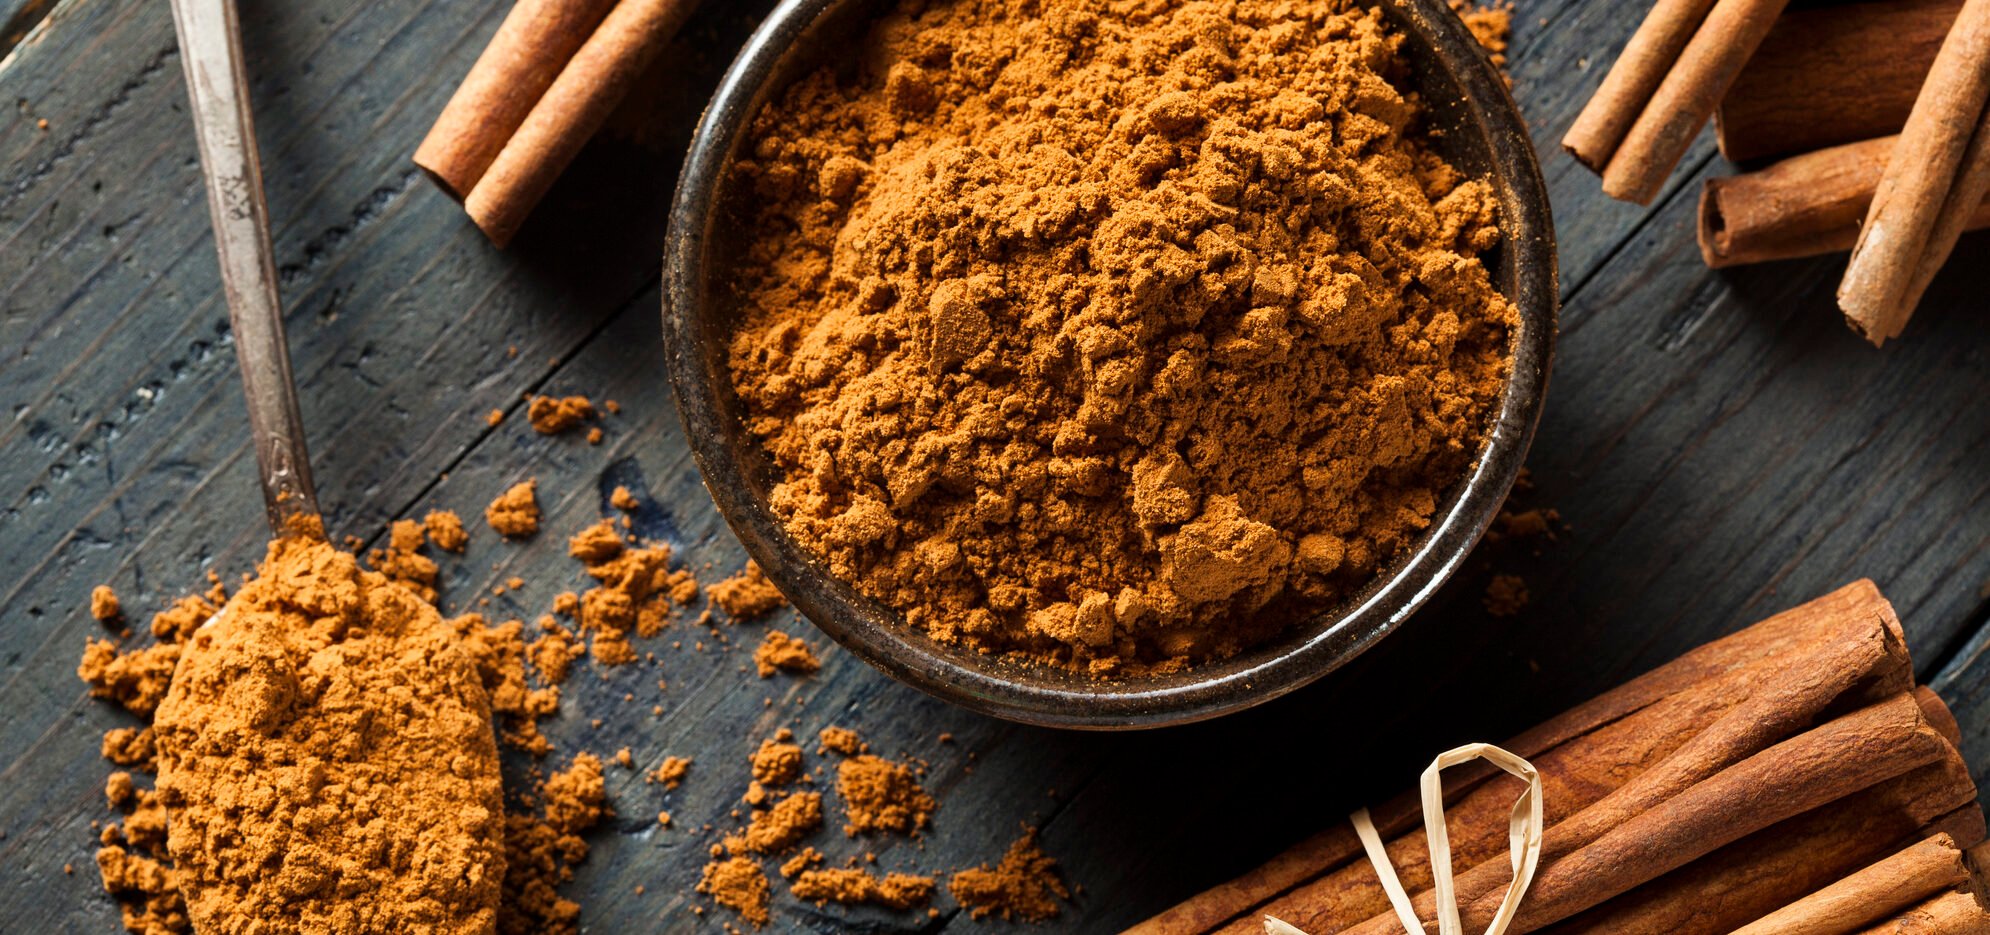 Attract money with cinnamon and bring prosperity into your life - WeMystic